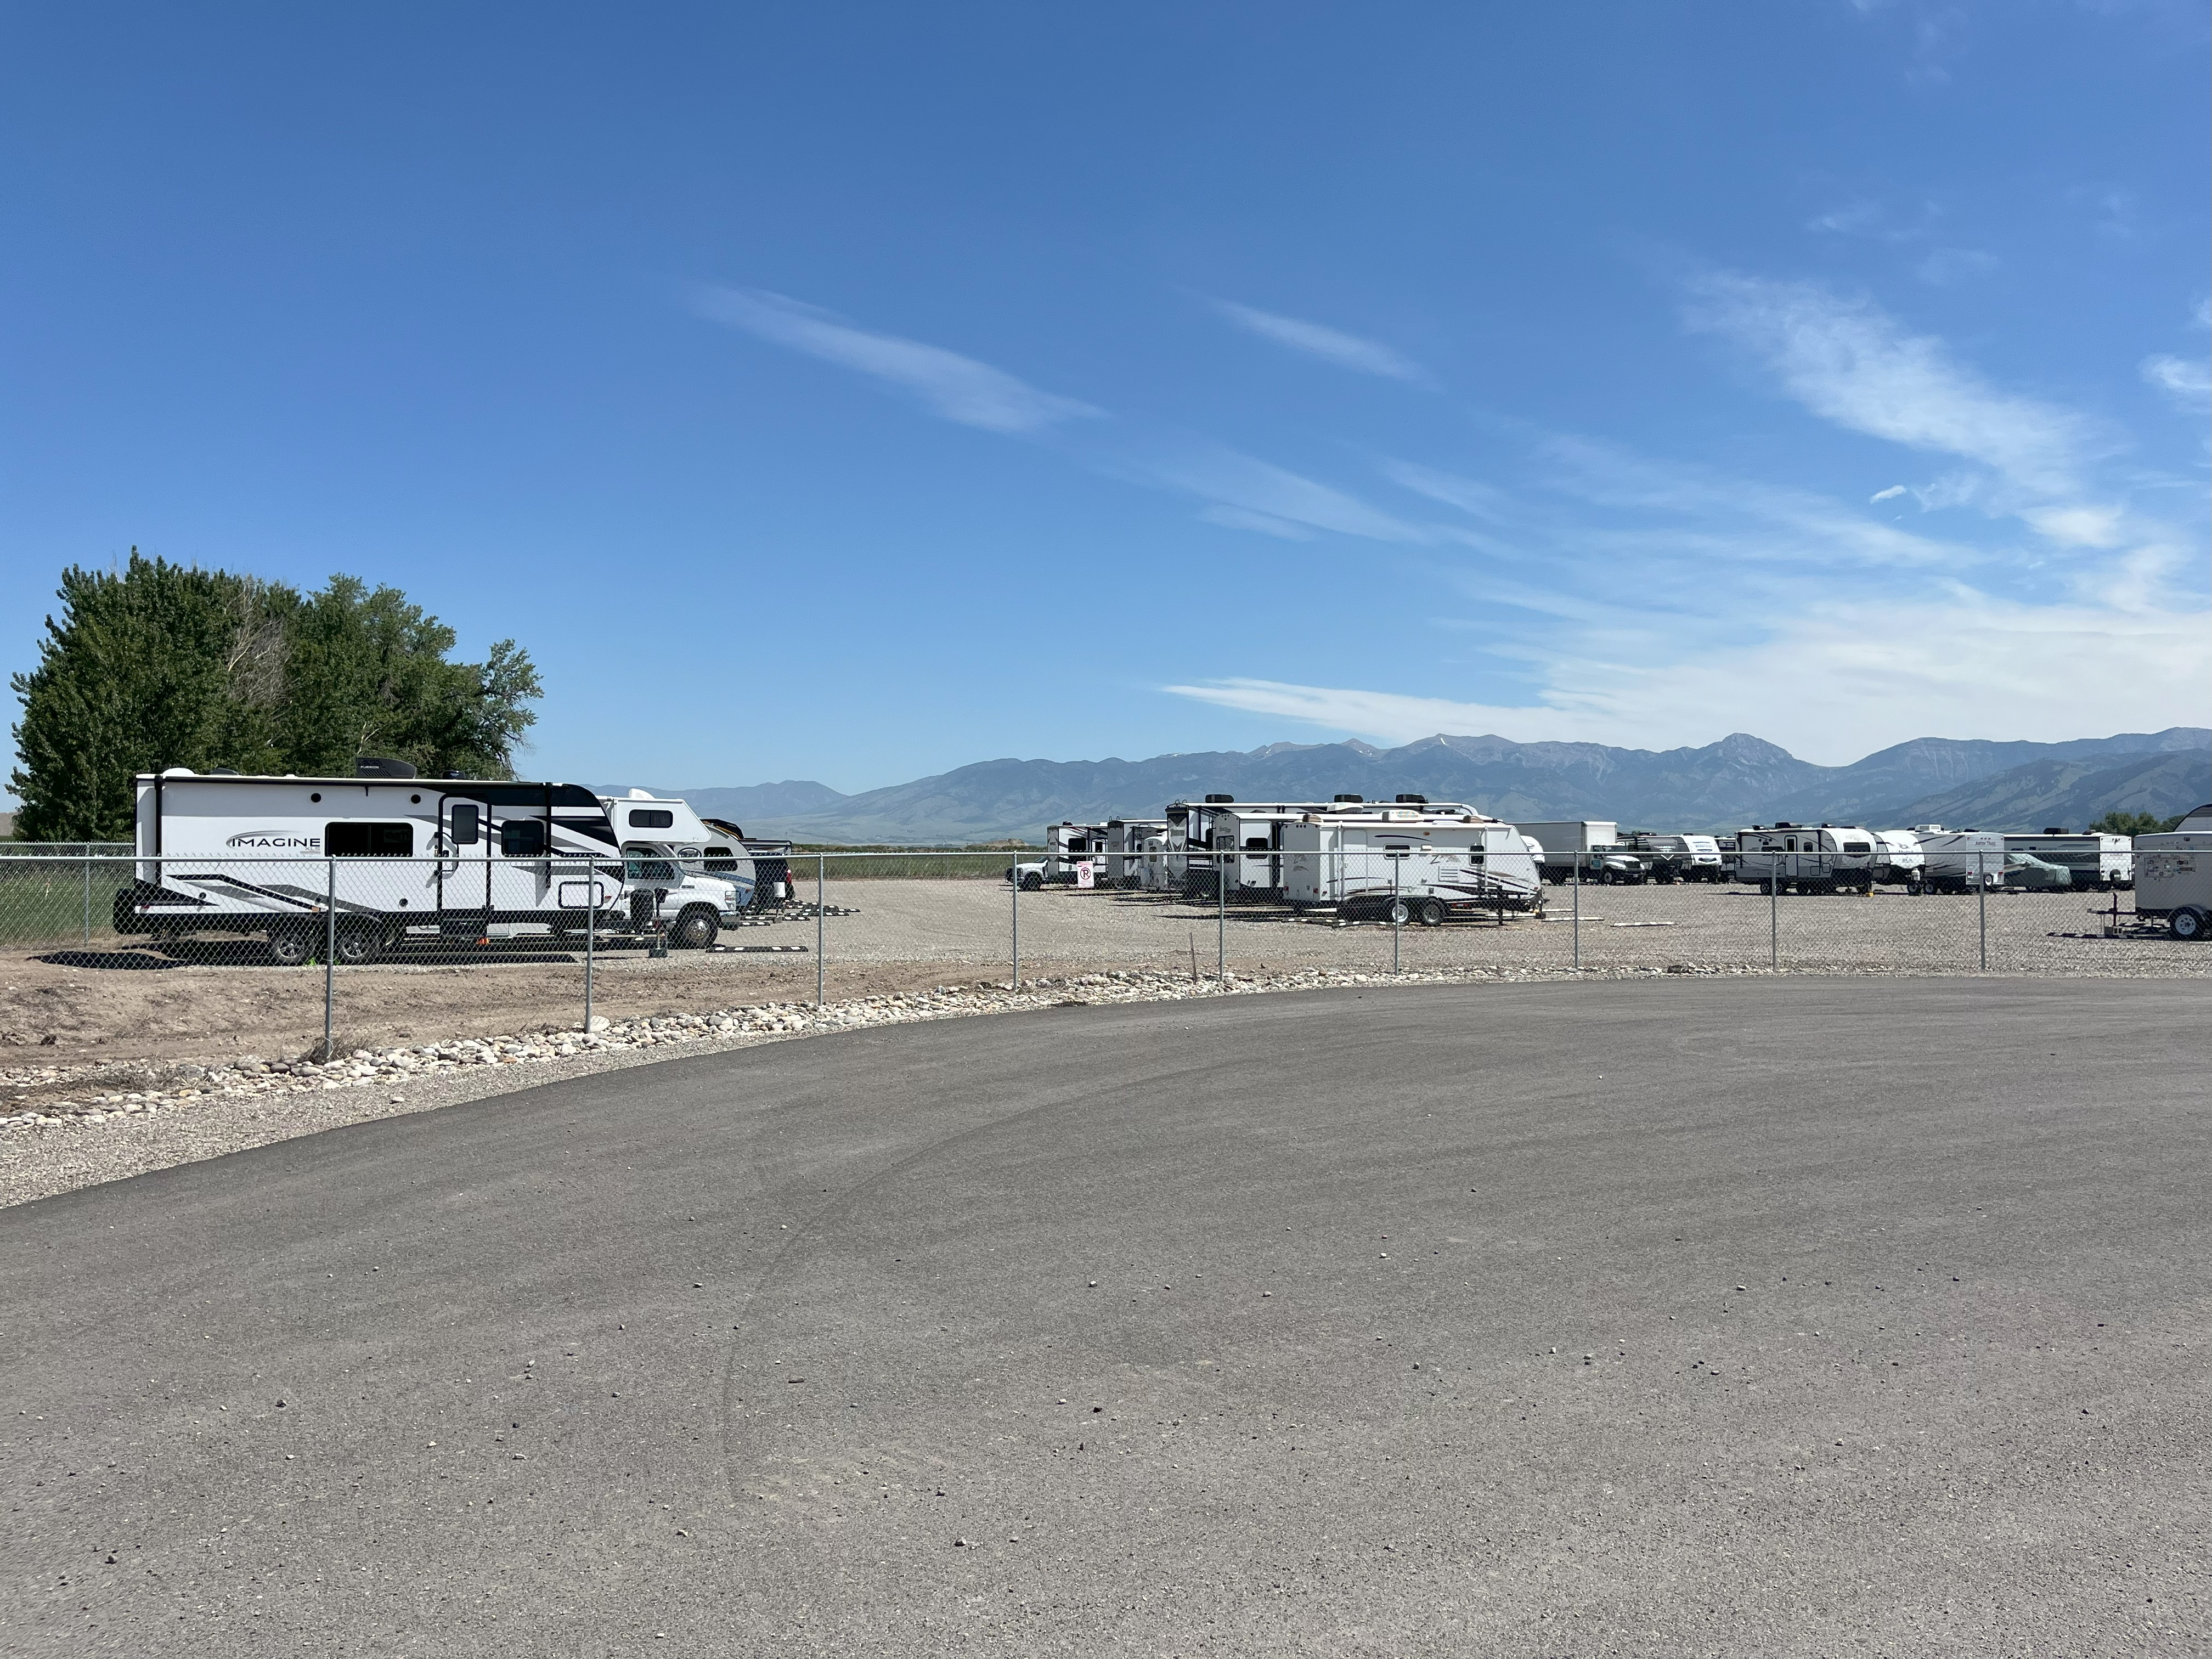 yellowstone airport storage outdoor parking area with rvs, campers, trailers, and cars